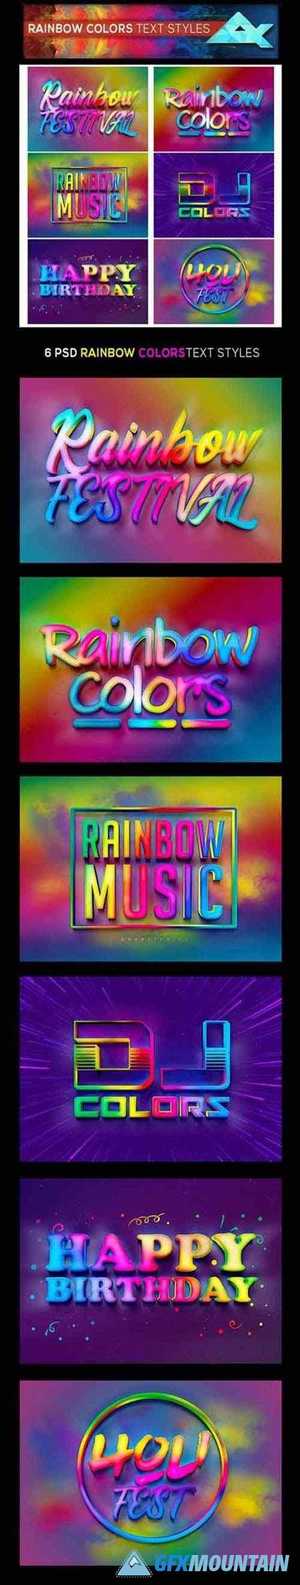 Rainbow Colors Photoshop Text Effects Styles 26378765